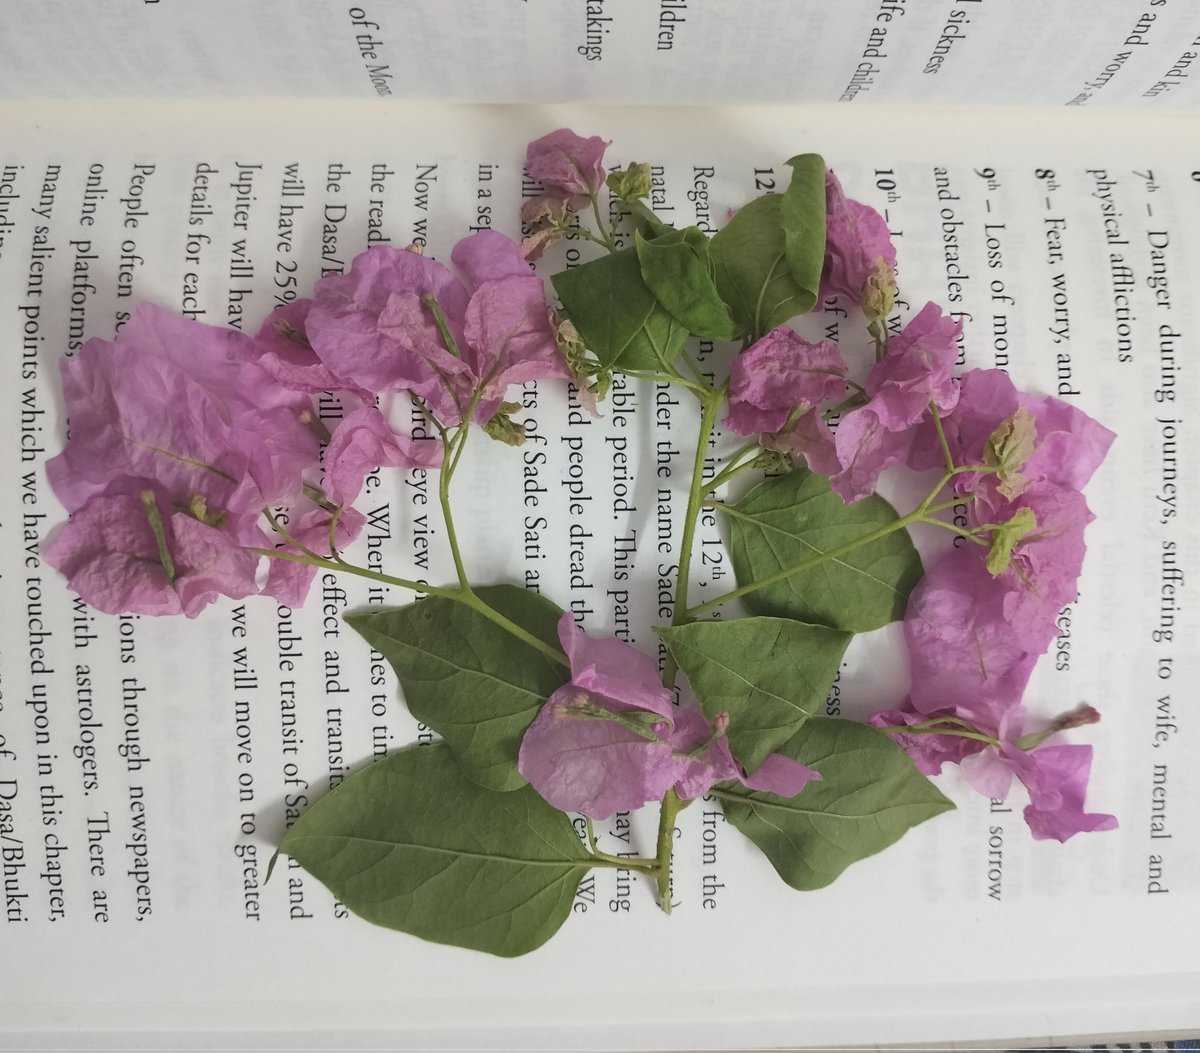 So today my man went outside at 45° temperature and brought me a Bougainville flower laiden stem from I don't even know where, because I was not feeling good 🙂